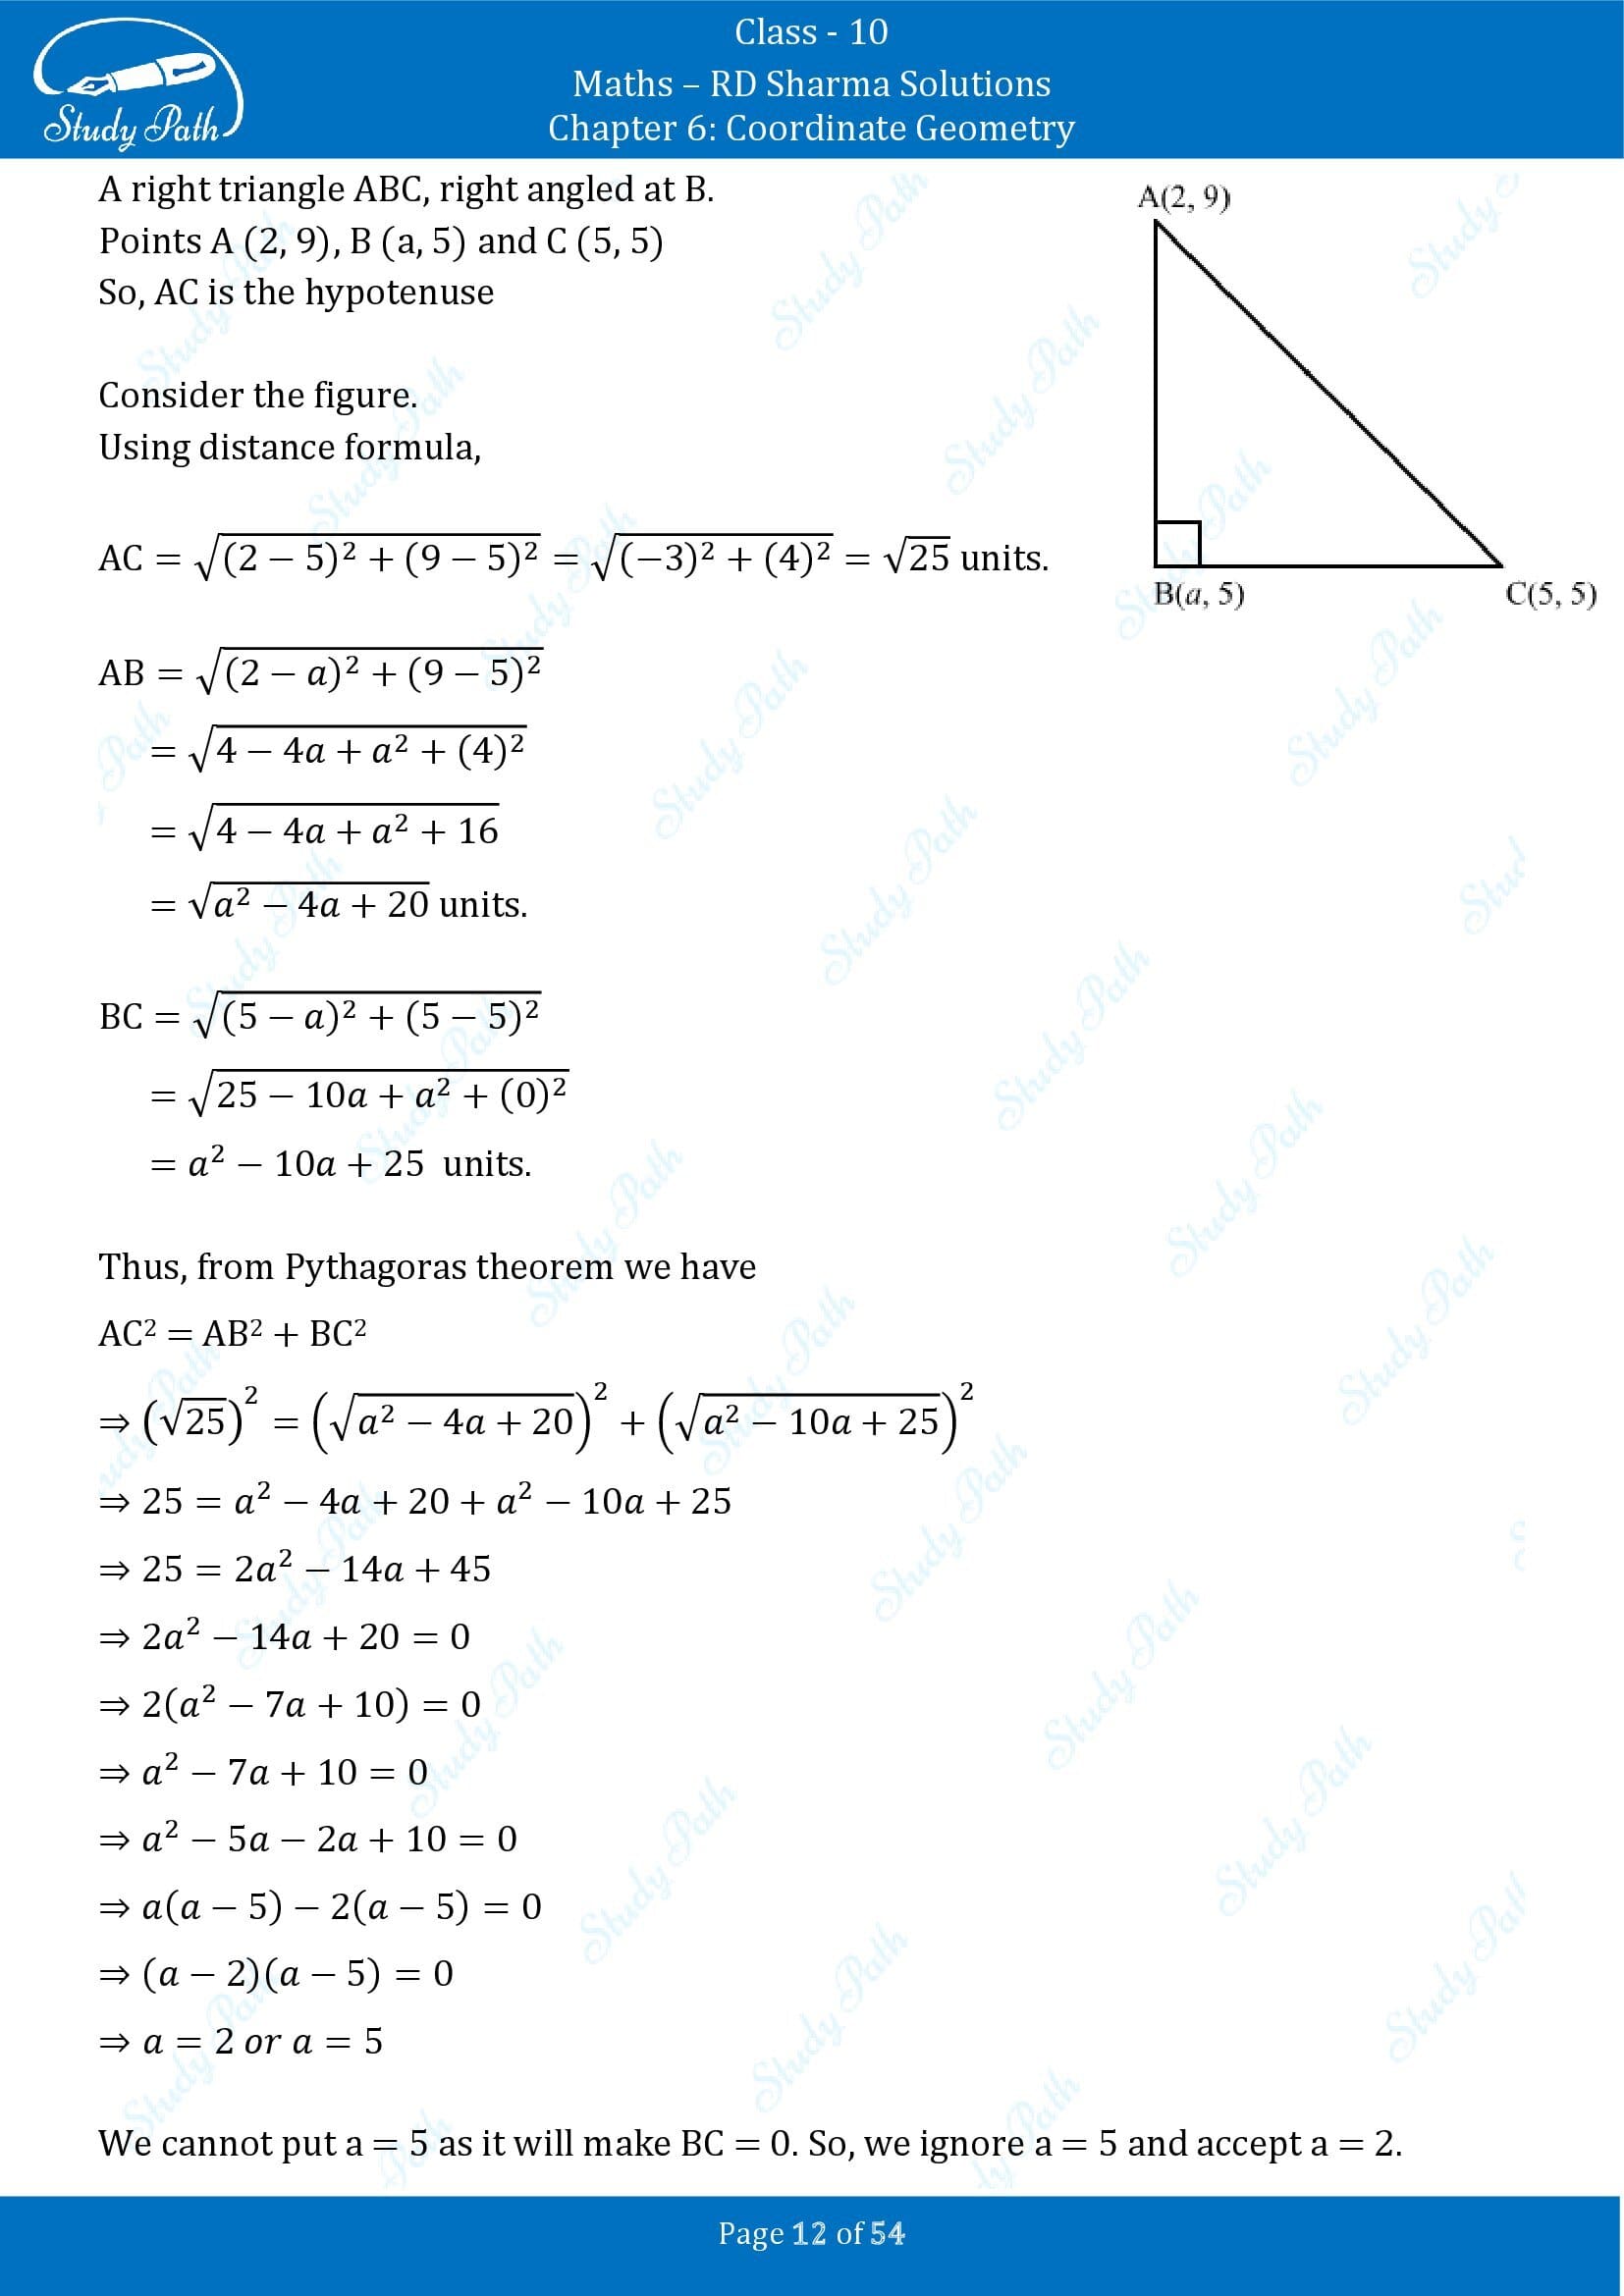 RD Sharma Solutions Class 10 Chapter 6 Coordinate Geometry Exercise 6.2 0012